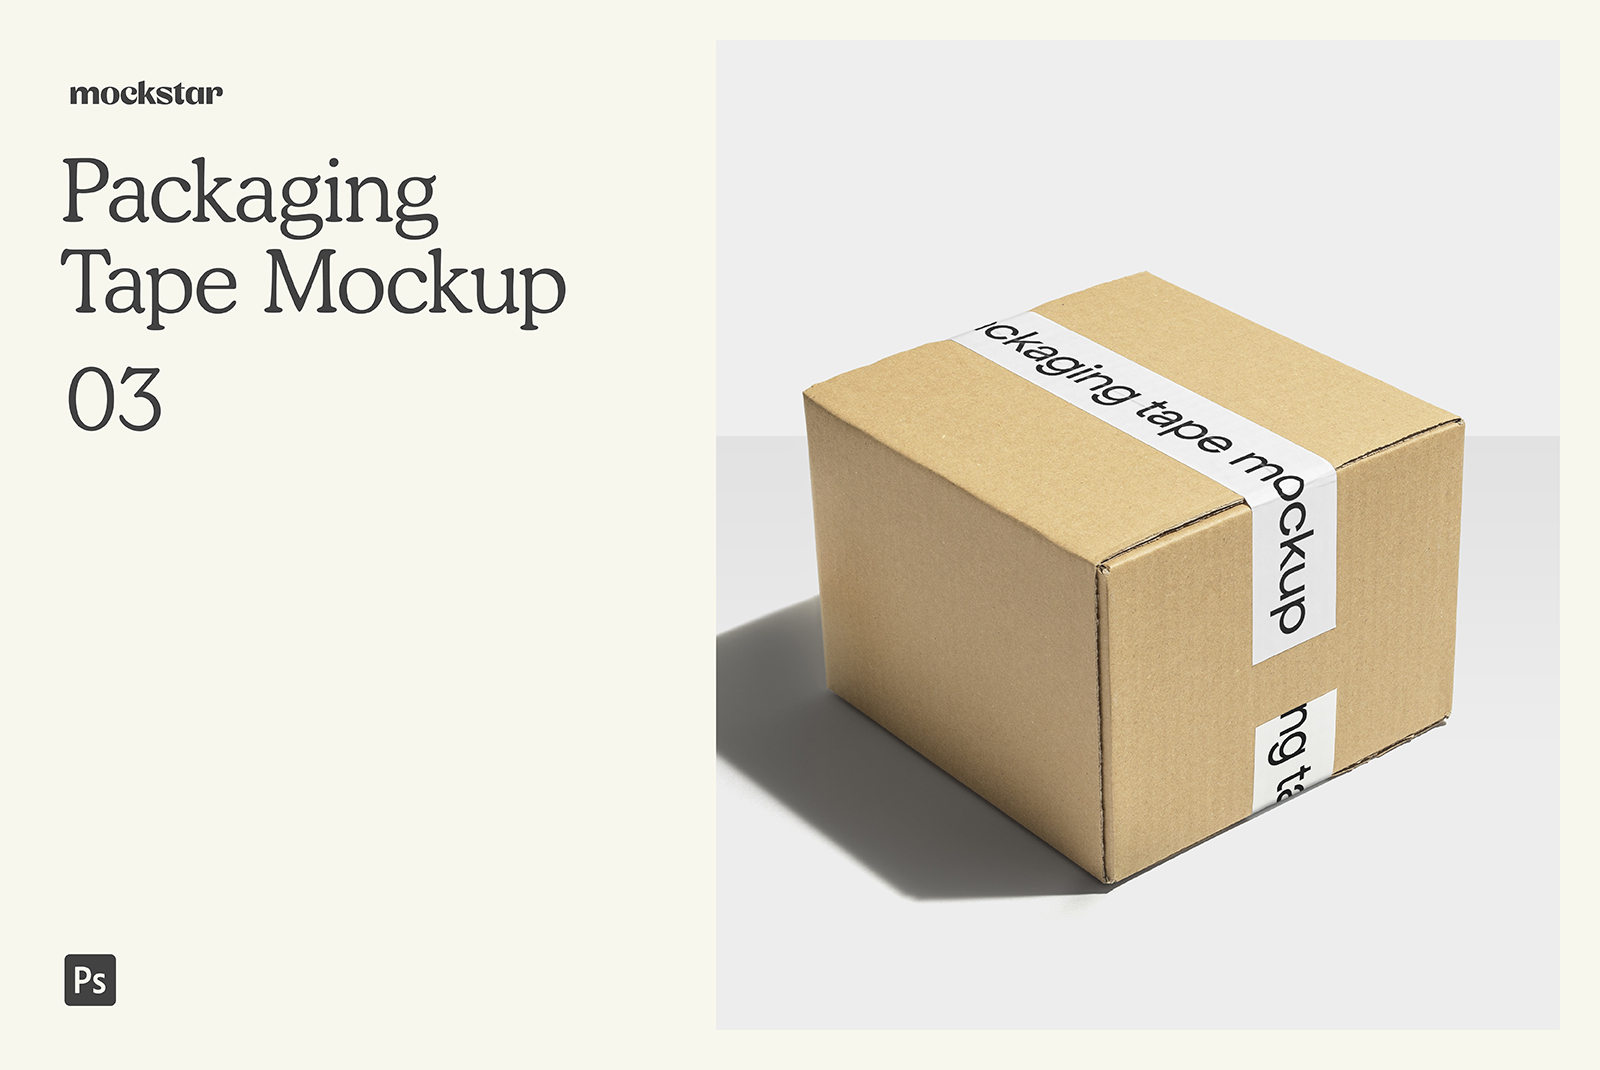 Cardboard box with customizable packaging tape design mockup in natural light, ideal for presenting branding projects for designers.